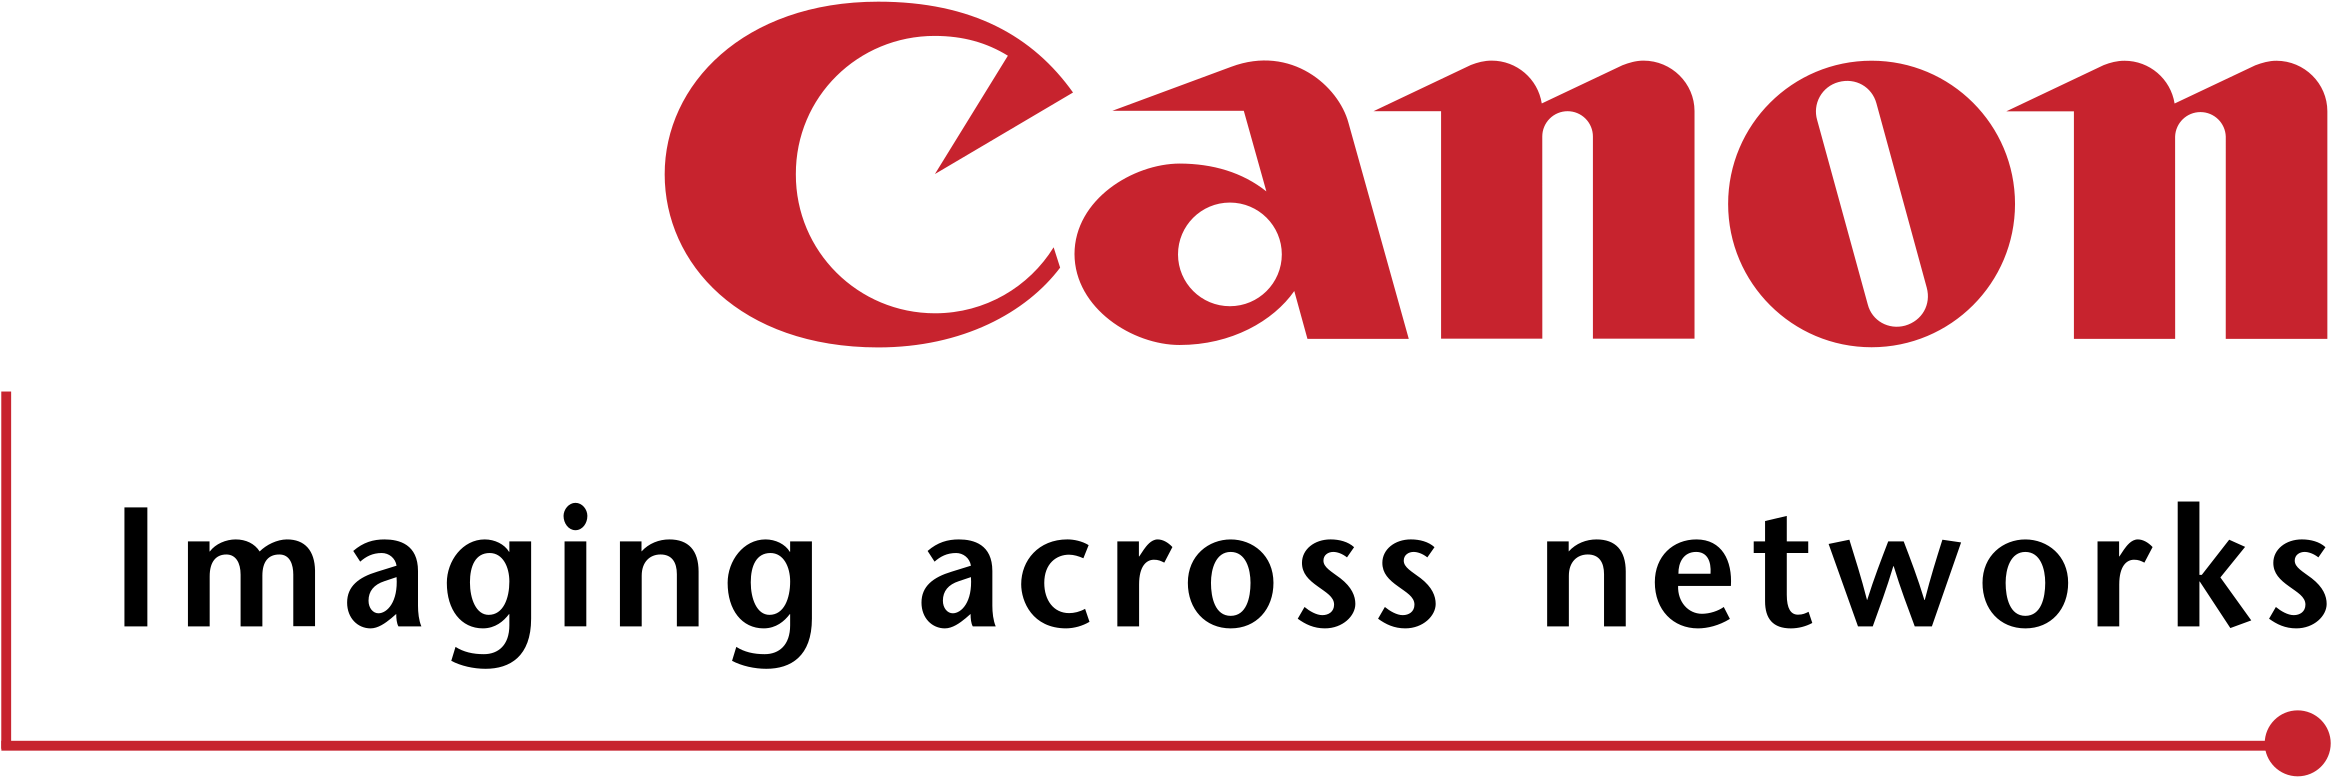 Canon Logowith Slogan PNG